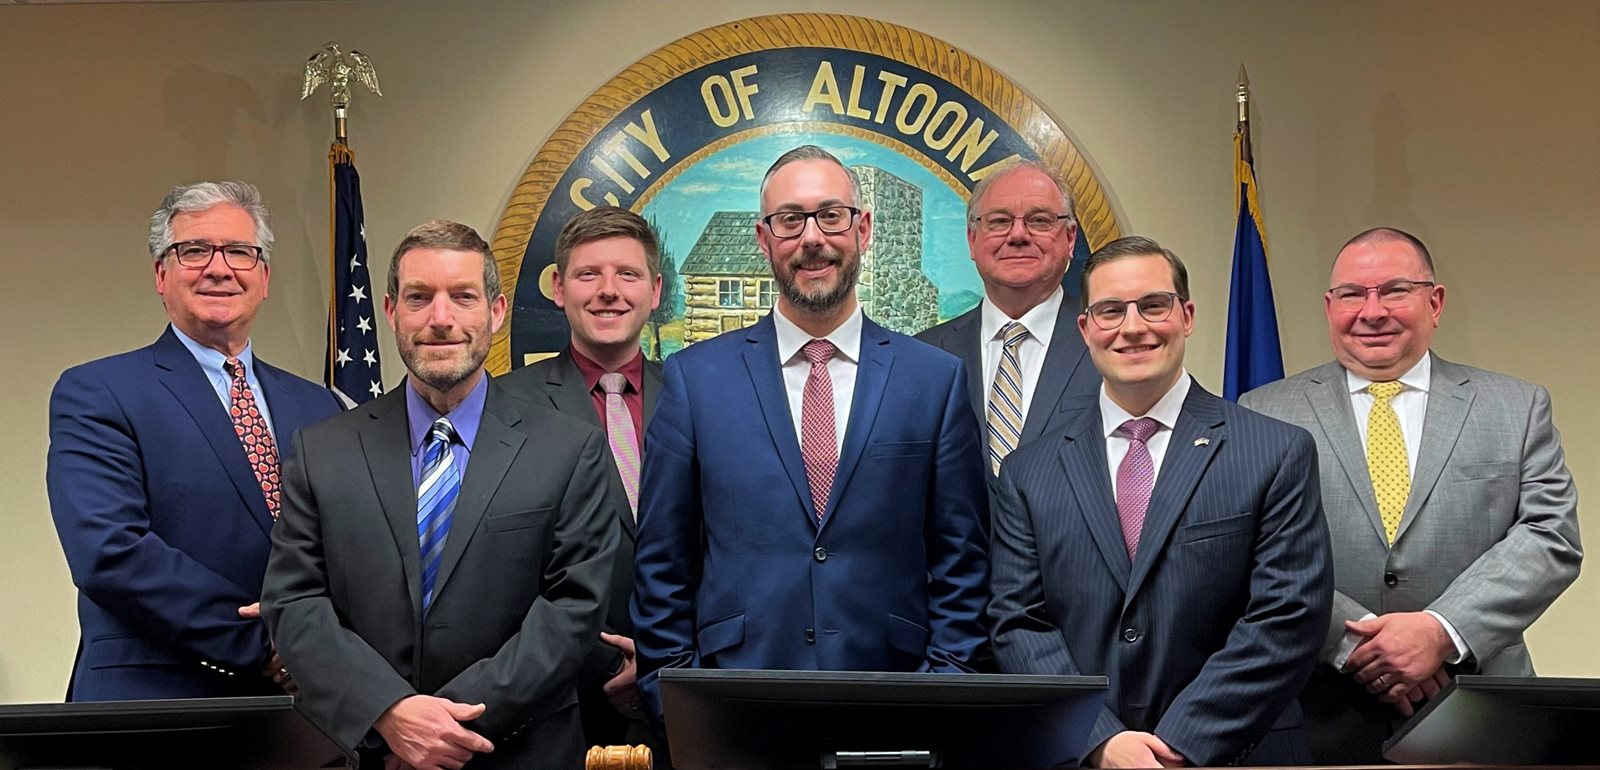 Group picture of City Council members 2022: Front Row: Councilman Dave Butterbaugh, Mayor Matt Pacifico, Vice-Mayor Jesse Ickes; Back Row: Councilman Bruce Kelley, Councilman Joe Carper, Councilman Dave Ellis, Councilman Ron Beatty